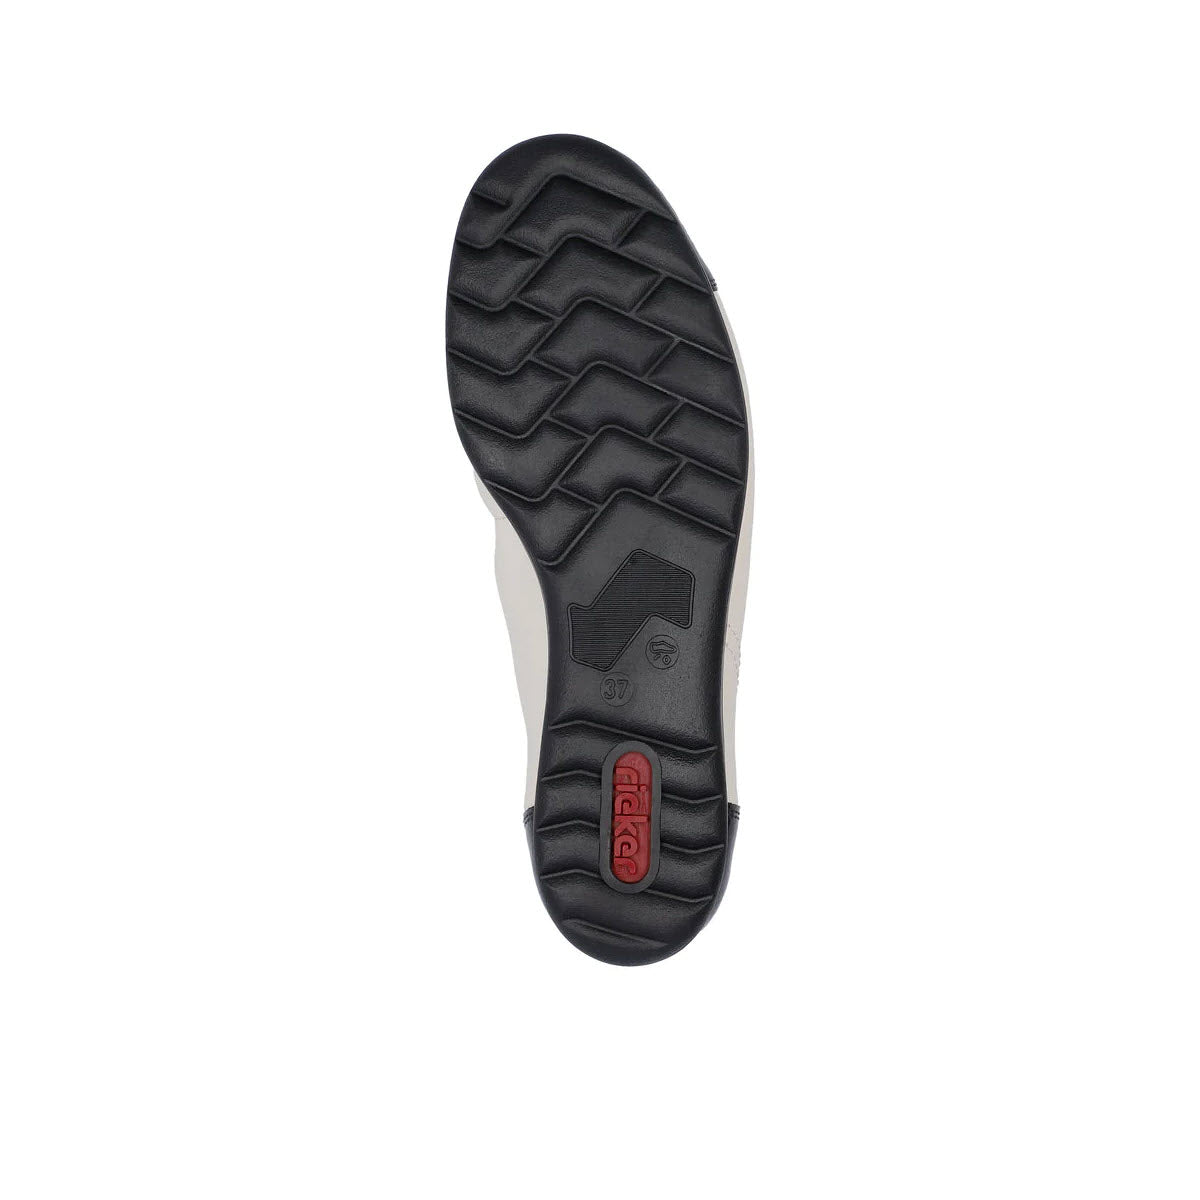 Sole of a Rieker ballet flat black shoe displaying a zigzag tread pattern and Rieker slip on shoe logos, isolated on a white background.